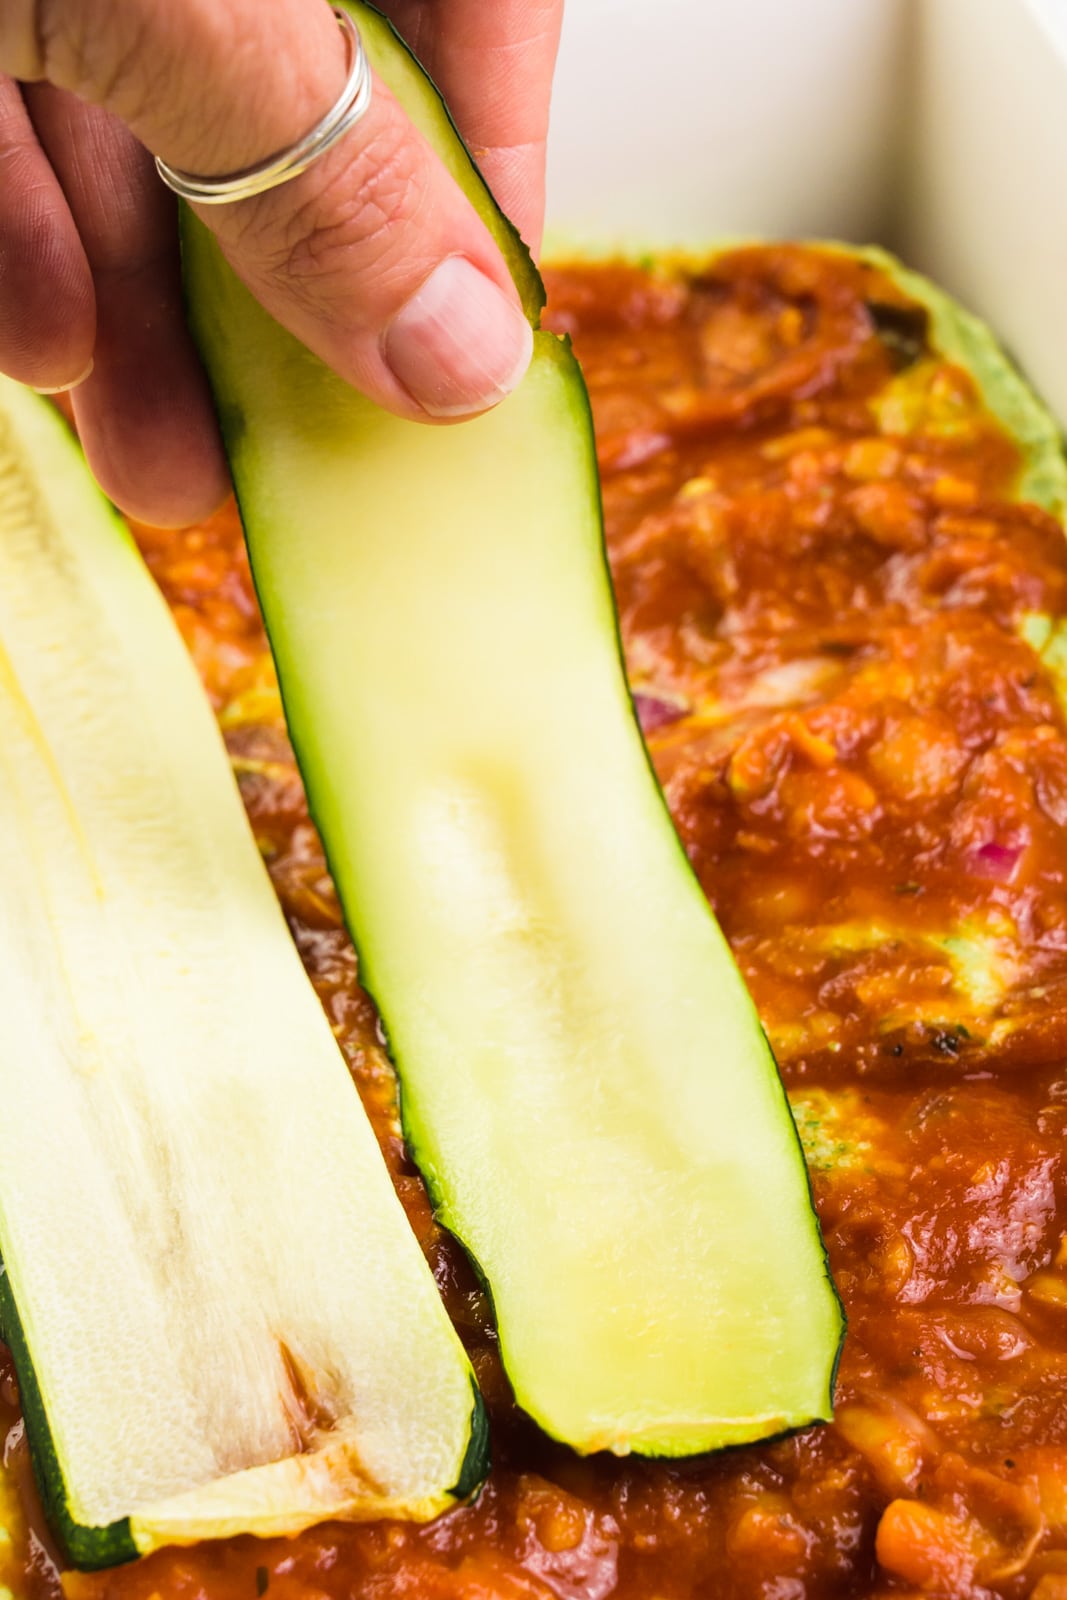 A hand is placing a zucchini slice over red sauce in a baking dish.